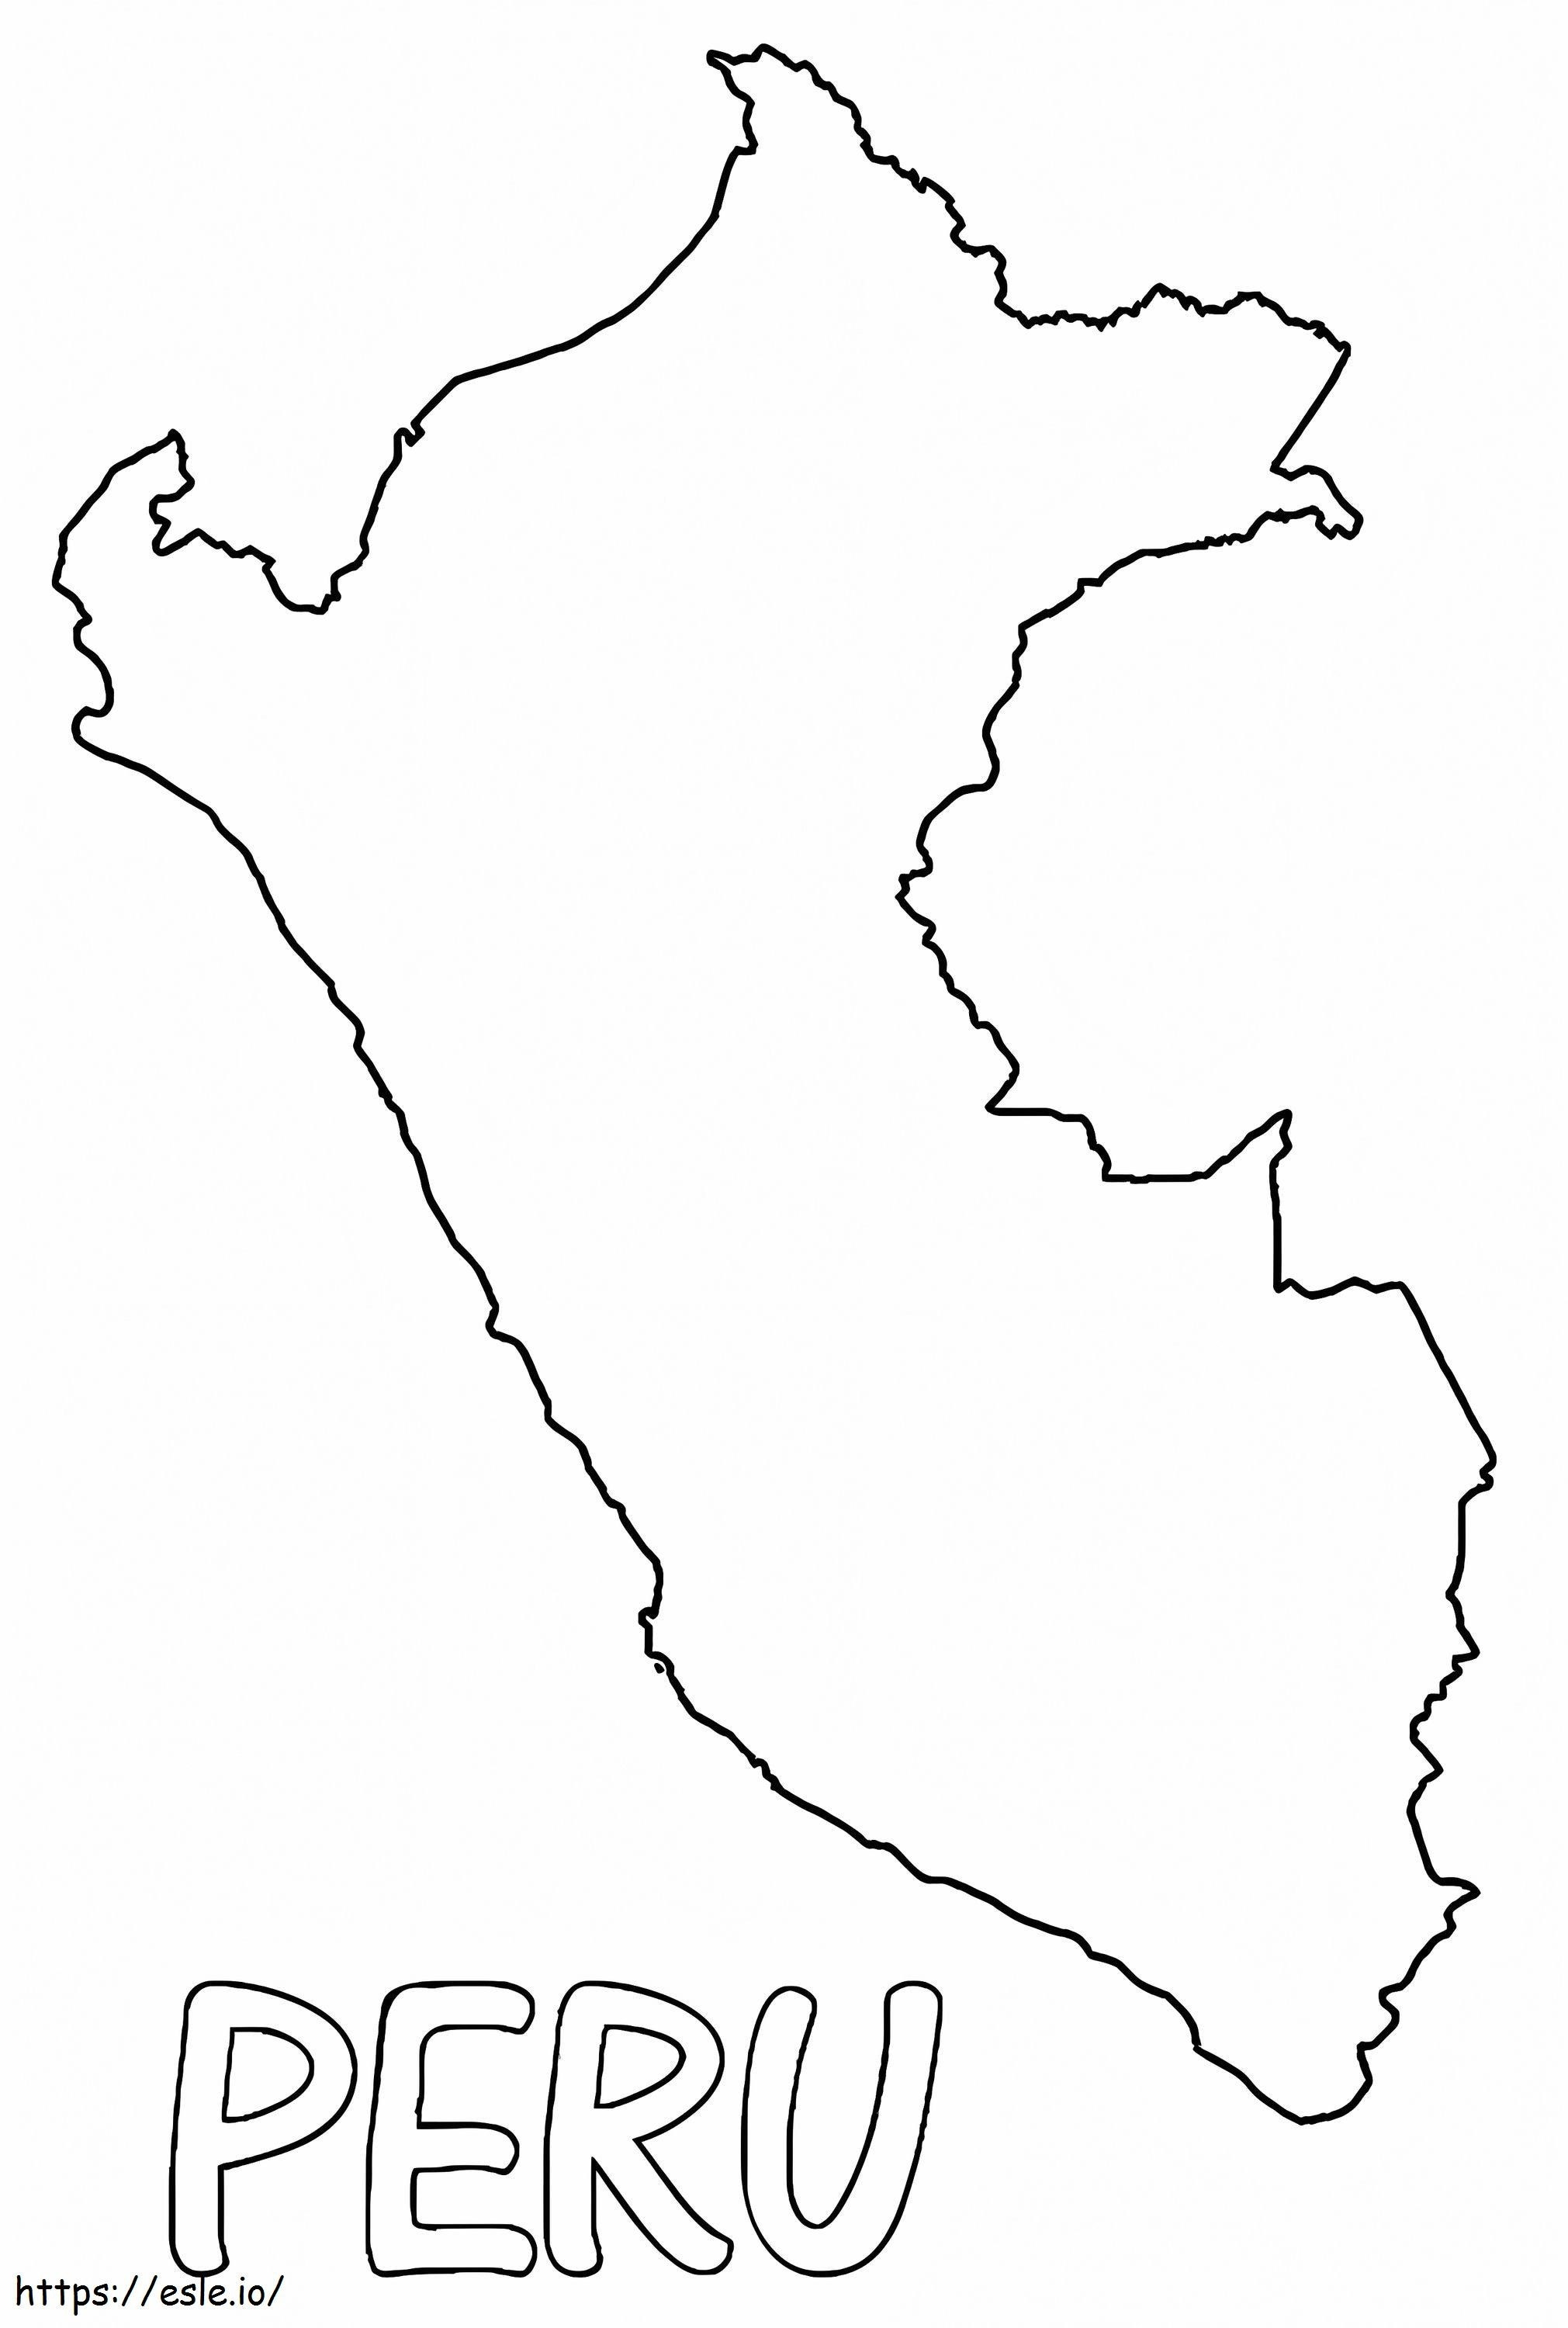 Peru Map Outline coloring page